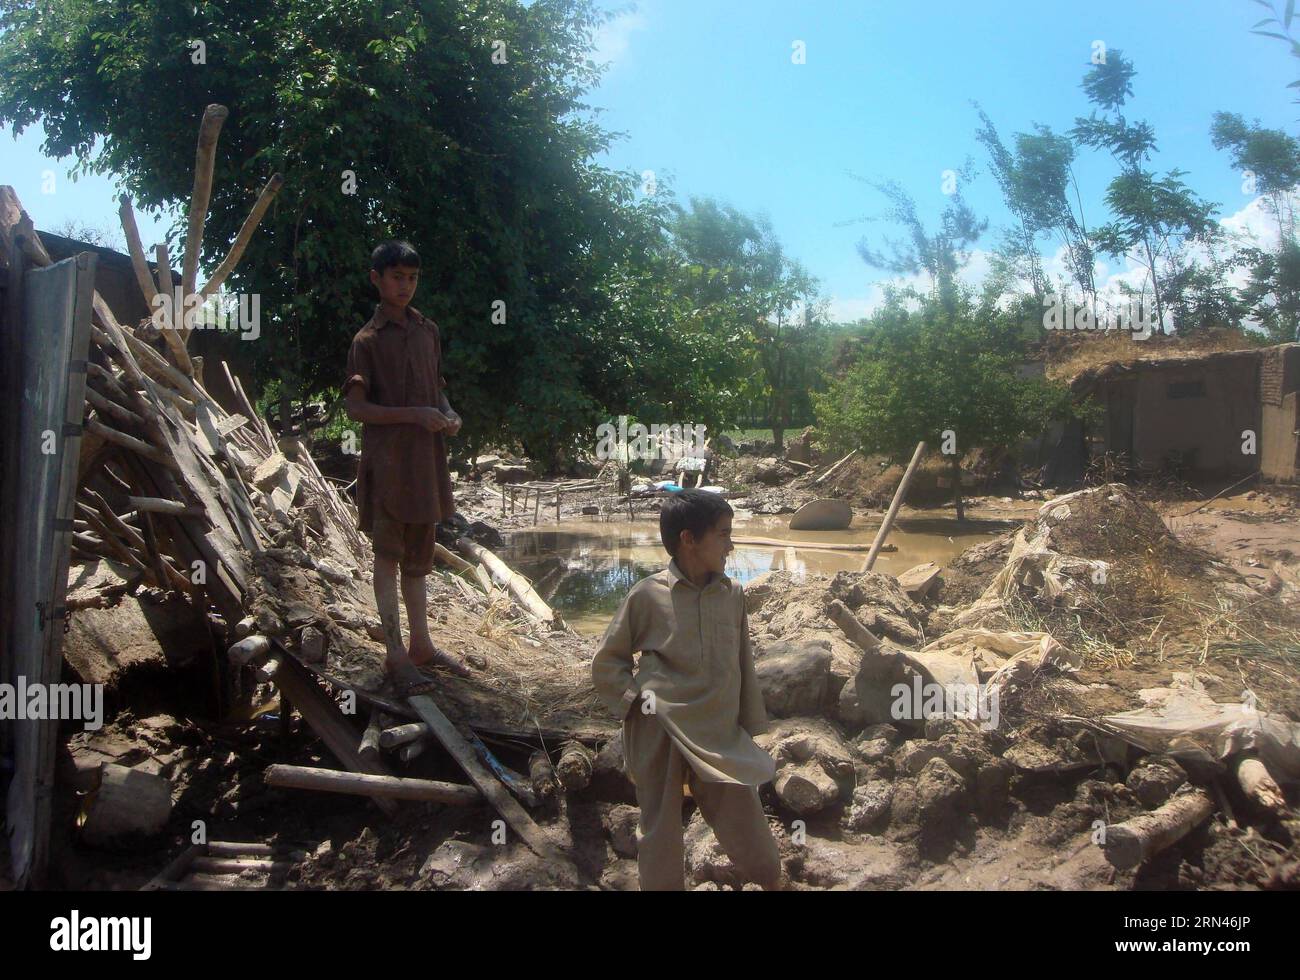 (150509) -- BAGHLAN, May 9, 2015 -- Afghan children gather around their destroyed houses after a heavy rain in Baghlan province, north Afghanistan, on May 9, 2015. One person has been confirmed dead and 10 others injured as flood washed away more than 500 houses in Baghlan-e-Markazi district of the northern Baghlan province early Saturday, district governor Gohar Khan Babri said. )(zhf) AFGHANISTAN-BAGHLAN-FLOOD Sahil PUBLICATIONxNOTxINxCHN   Baghlan May 9 2015 Afghan Children gather Around their destroyed Houses After a Heavy Rain in Baghlan Province North Afghanistan ON May 9 2015 One Person Stock Photo